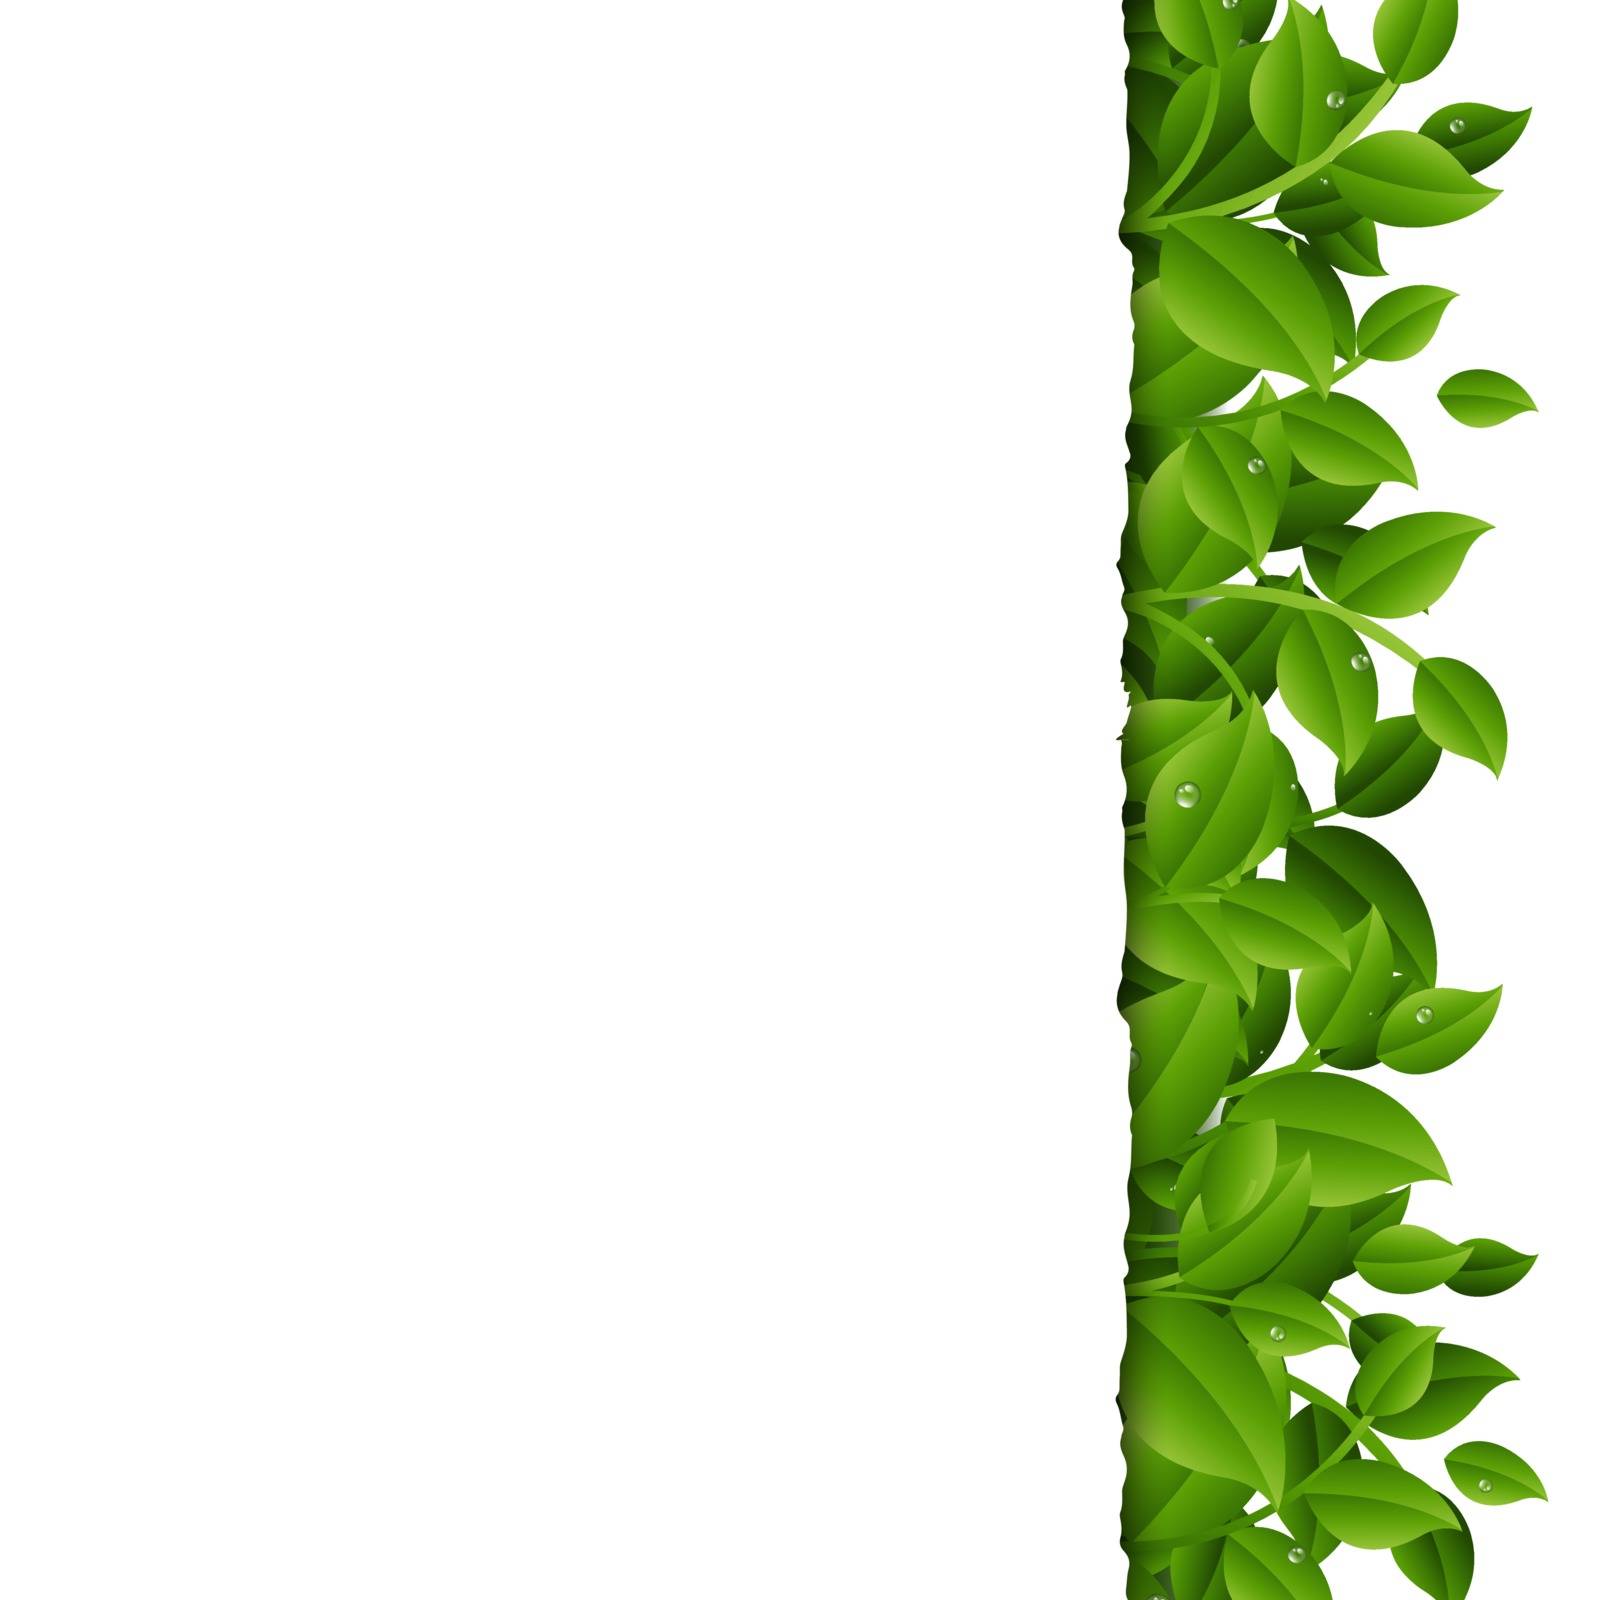 Green Branches With Leaves Border With Gradient Mesh, Vector Illustration